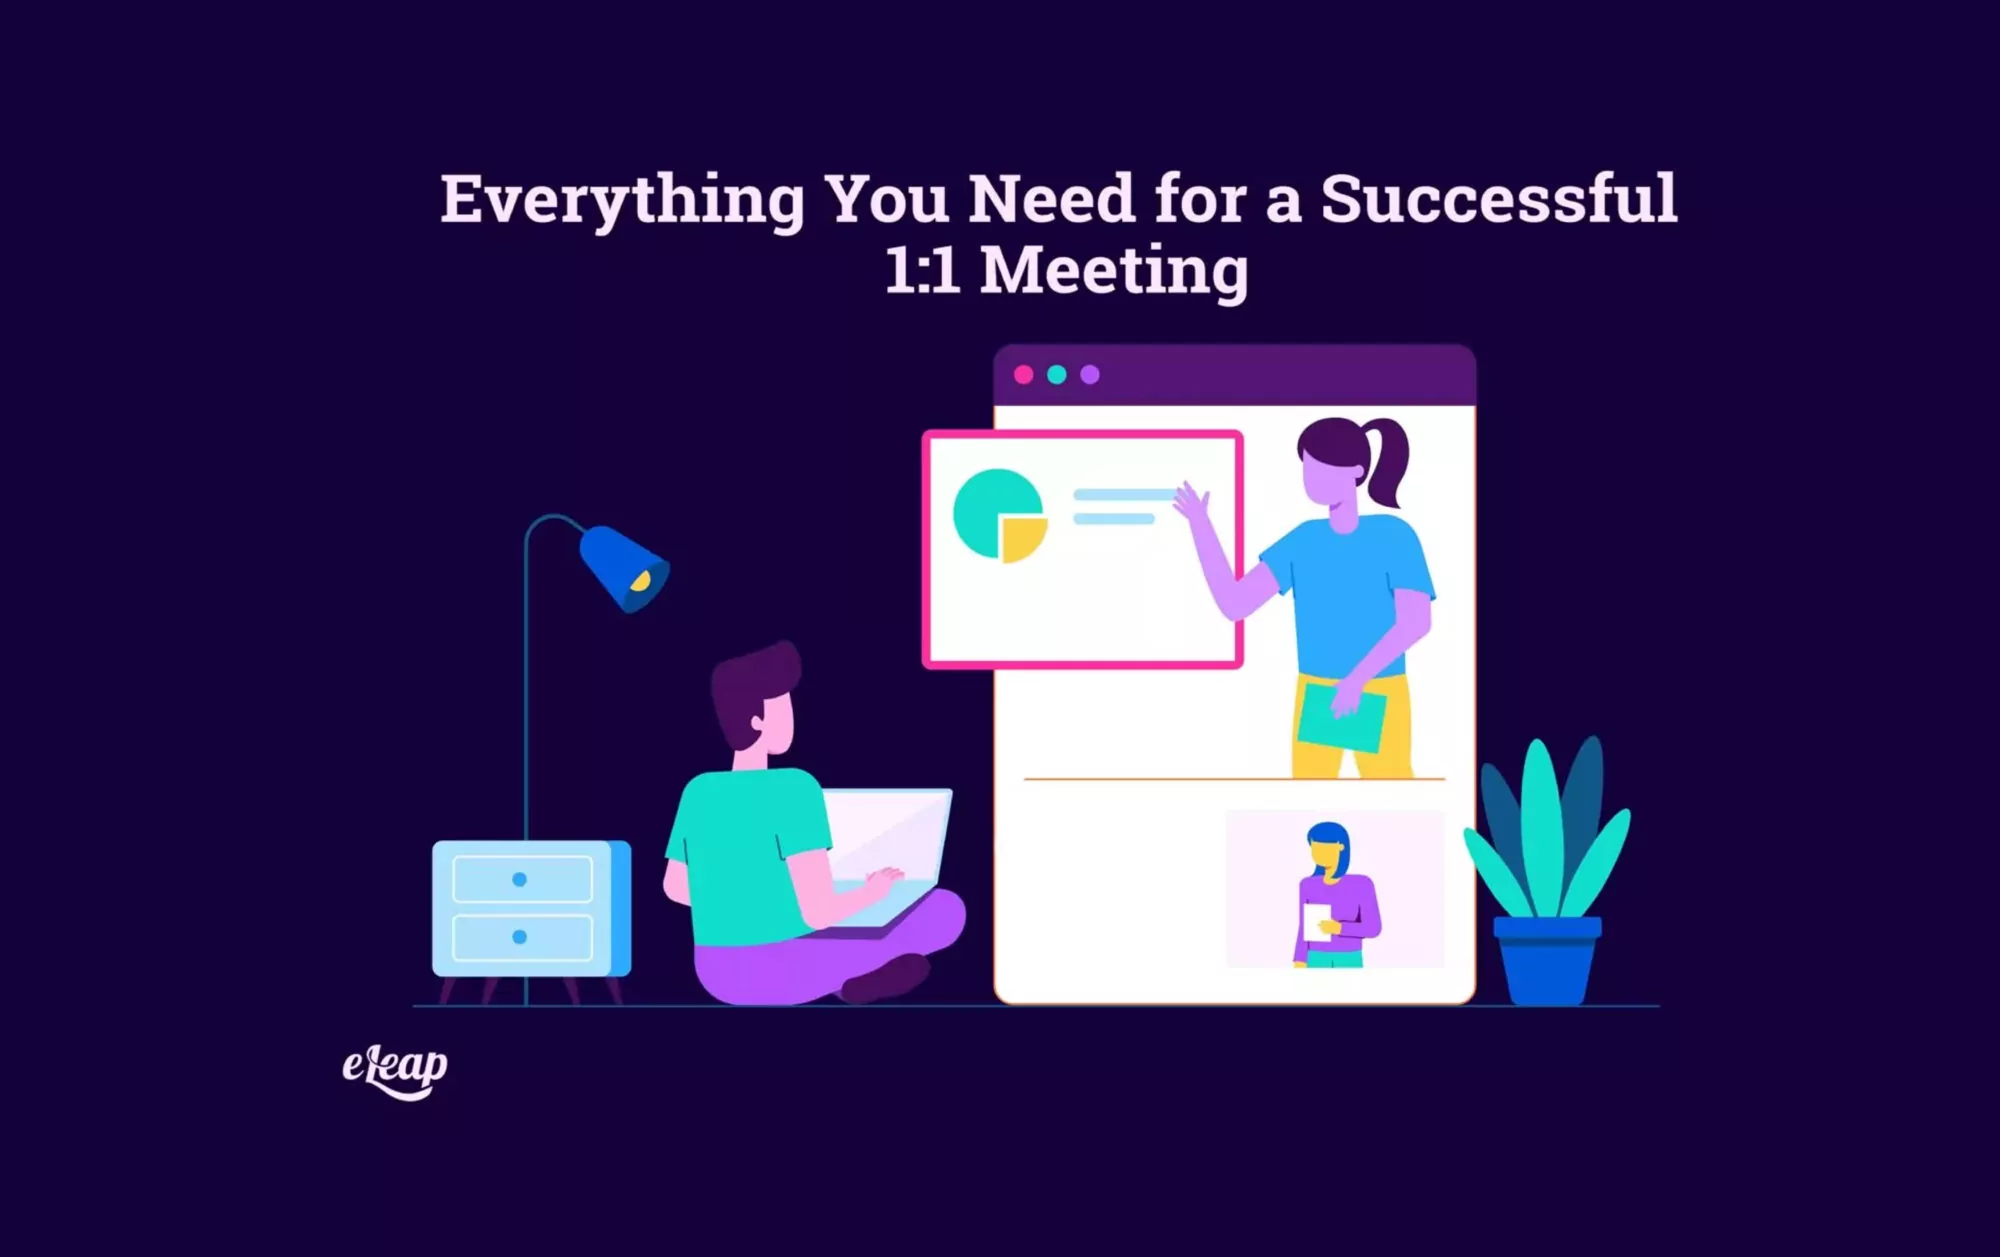 Everything You Need for a Successful 1:1 Meeting